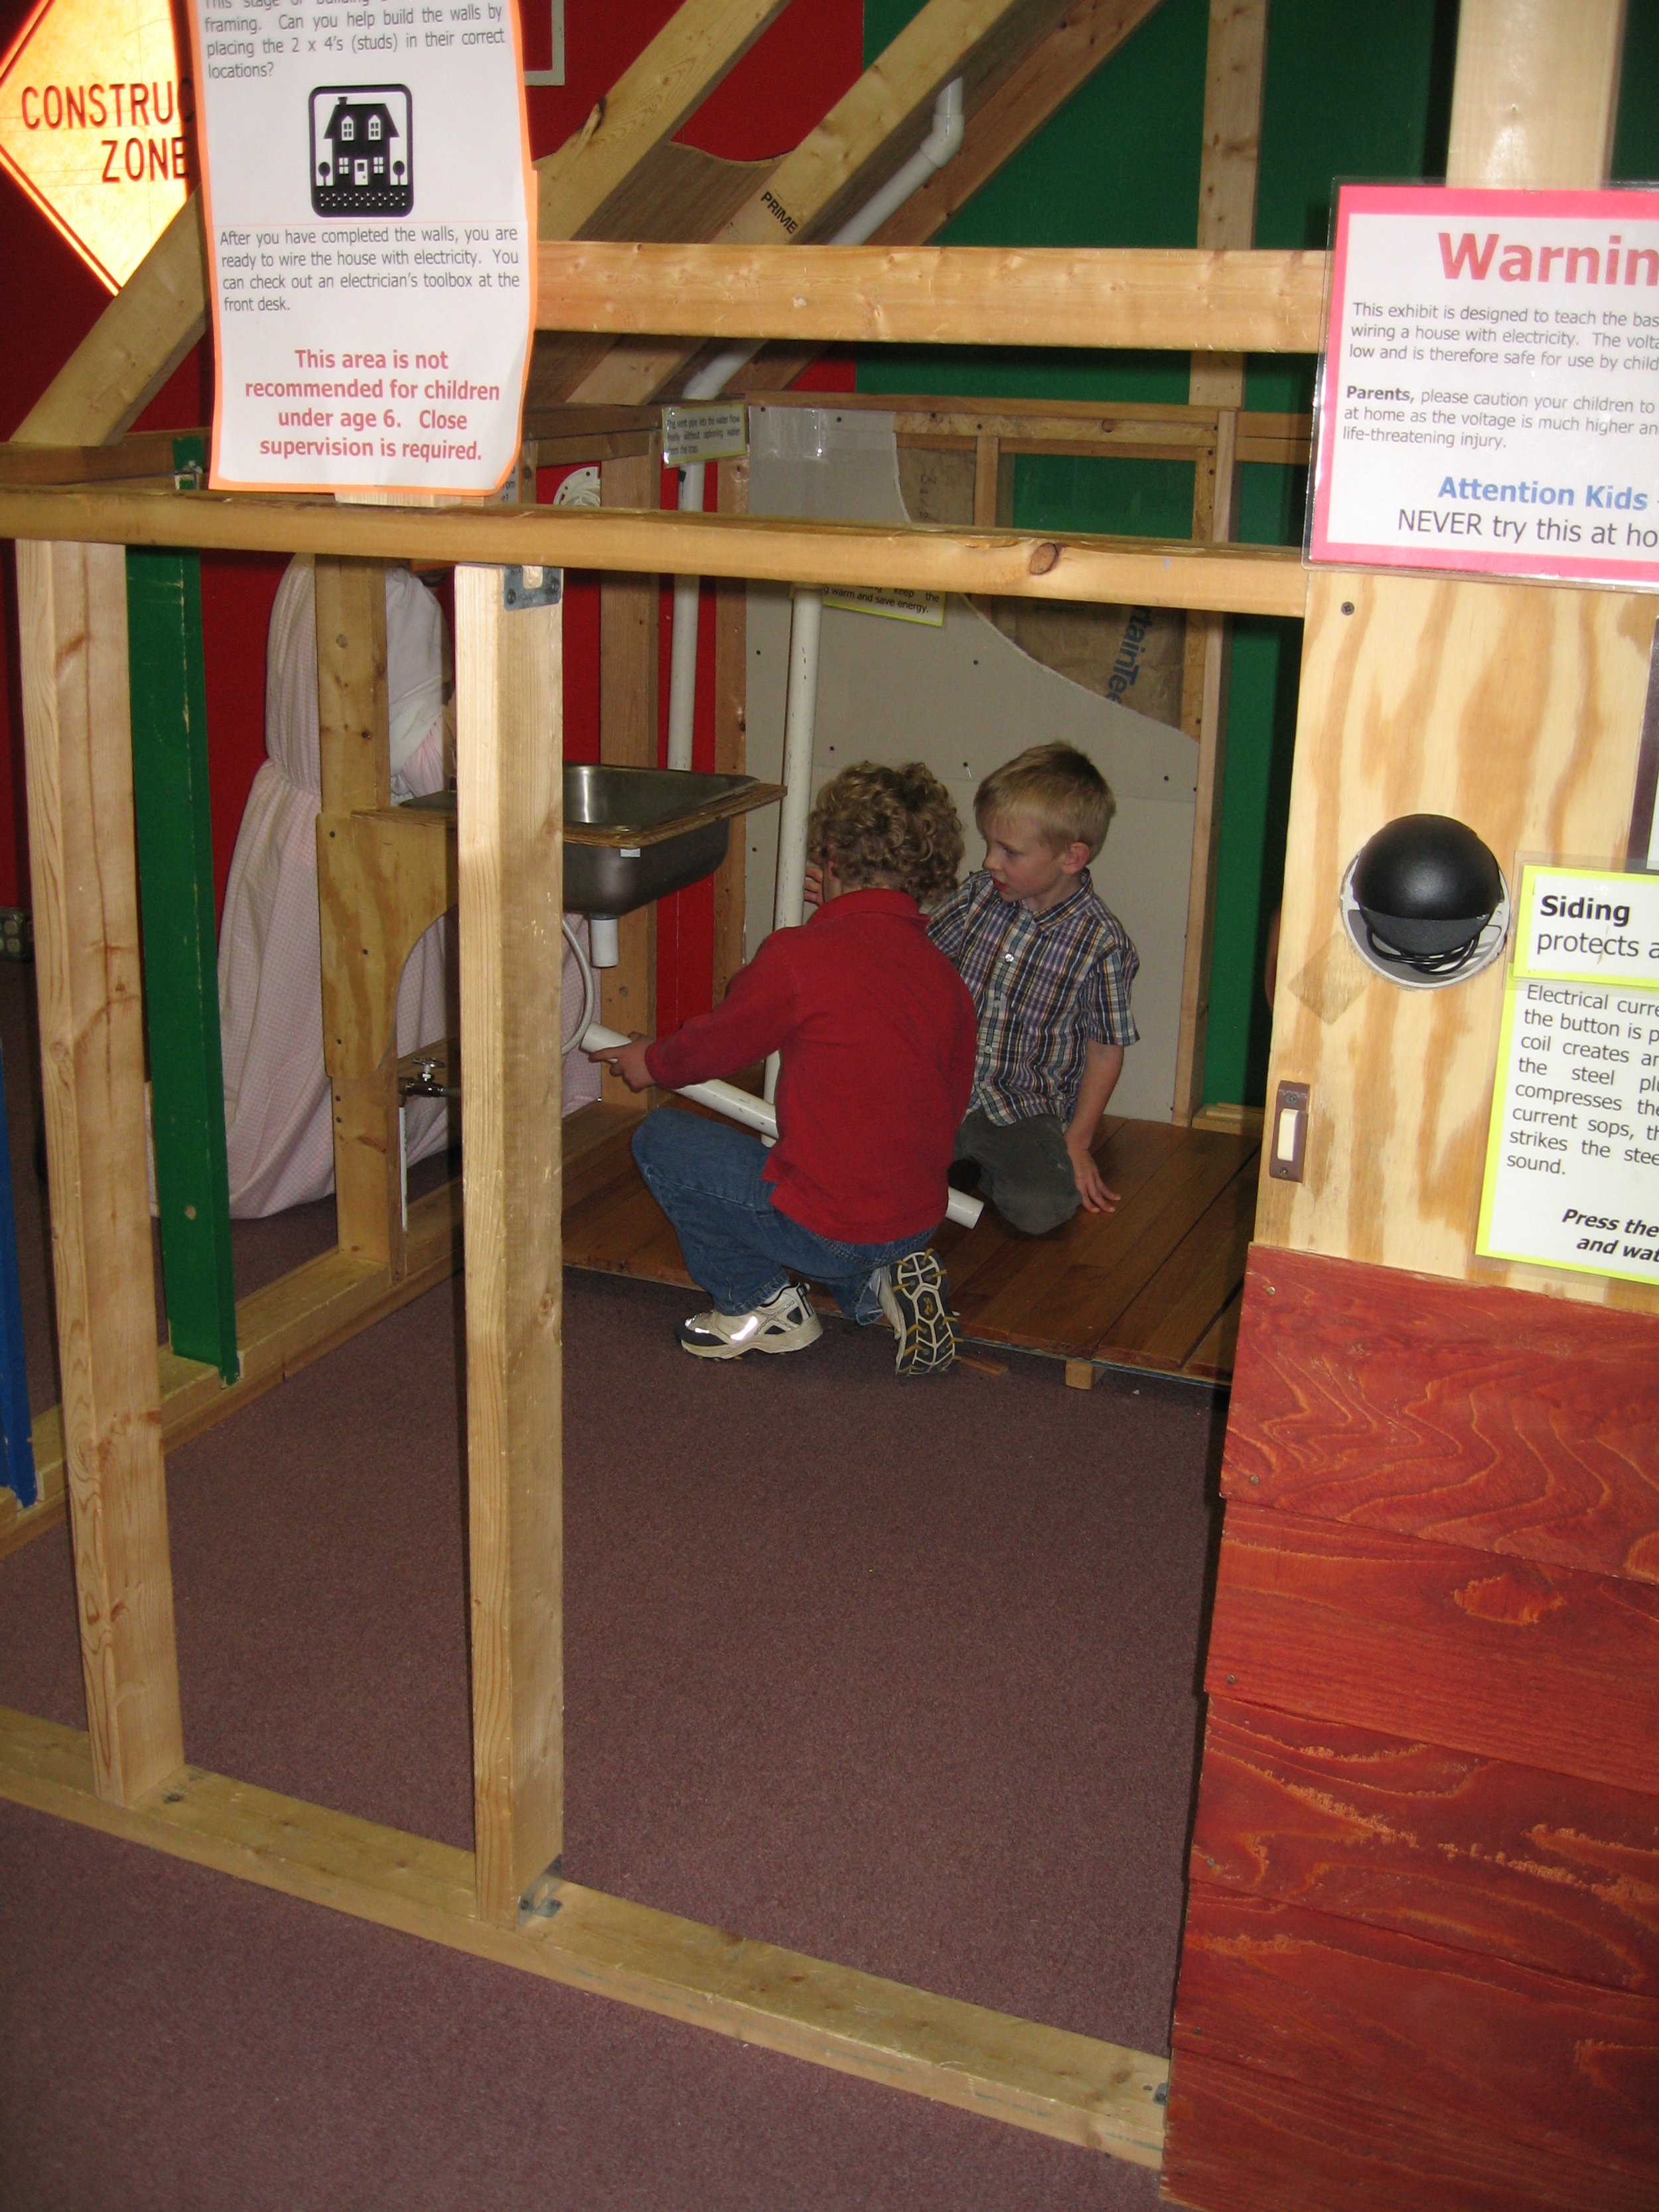  Fun in the original construction zone where kids could install the plumbing, wire the house and lay the flooring.  